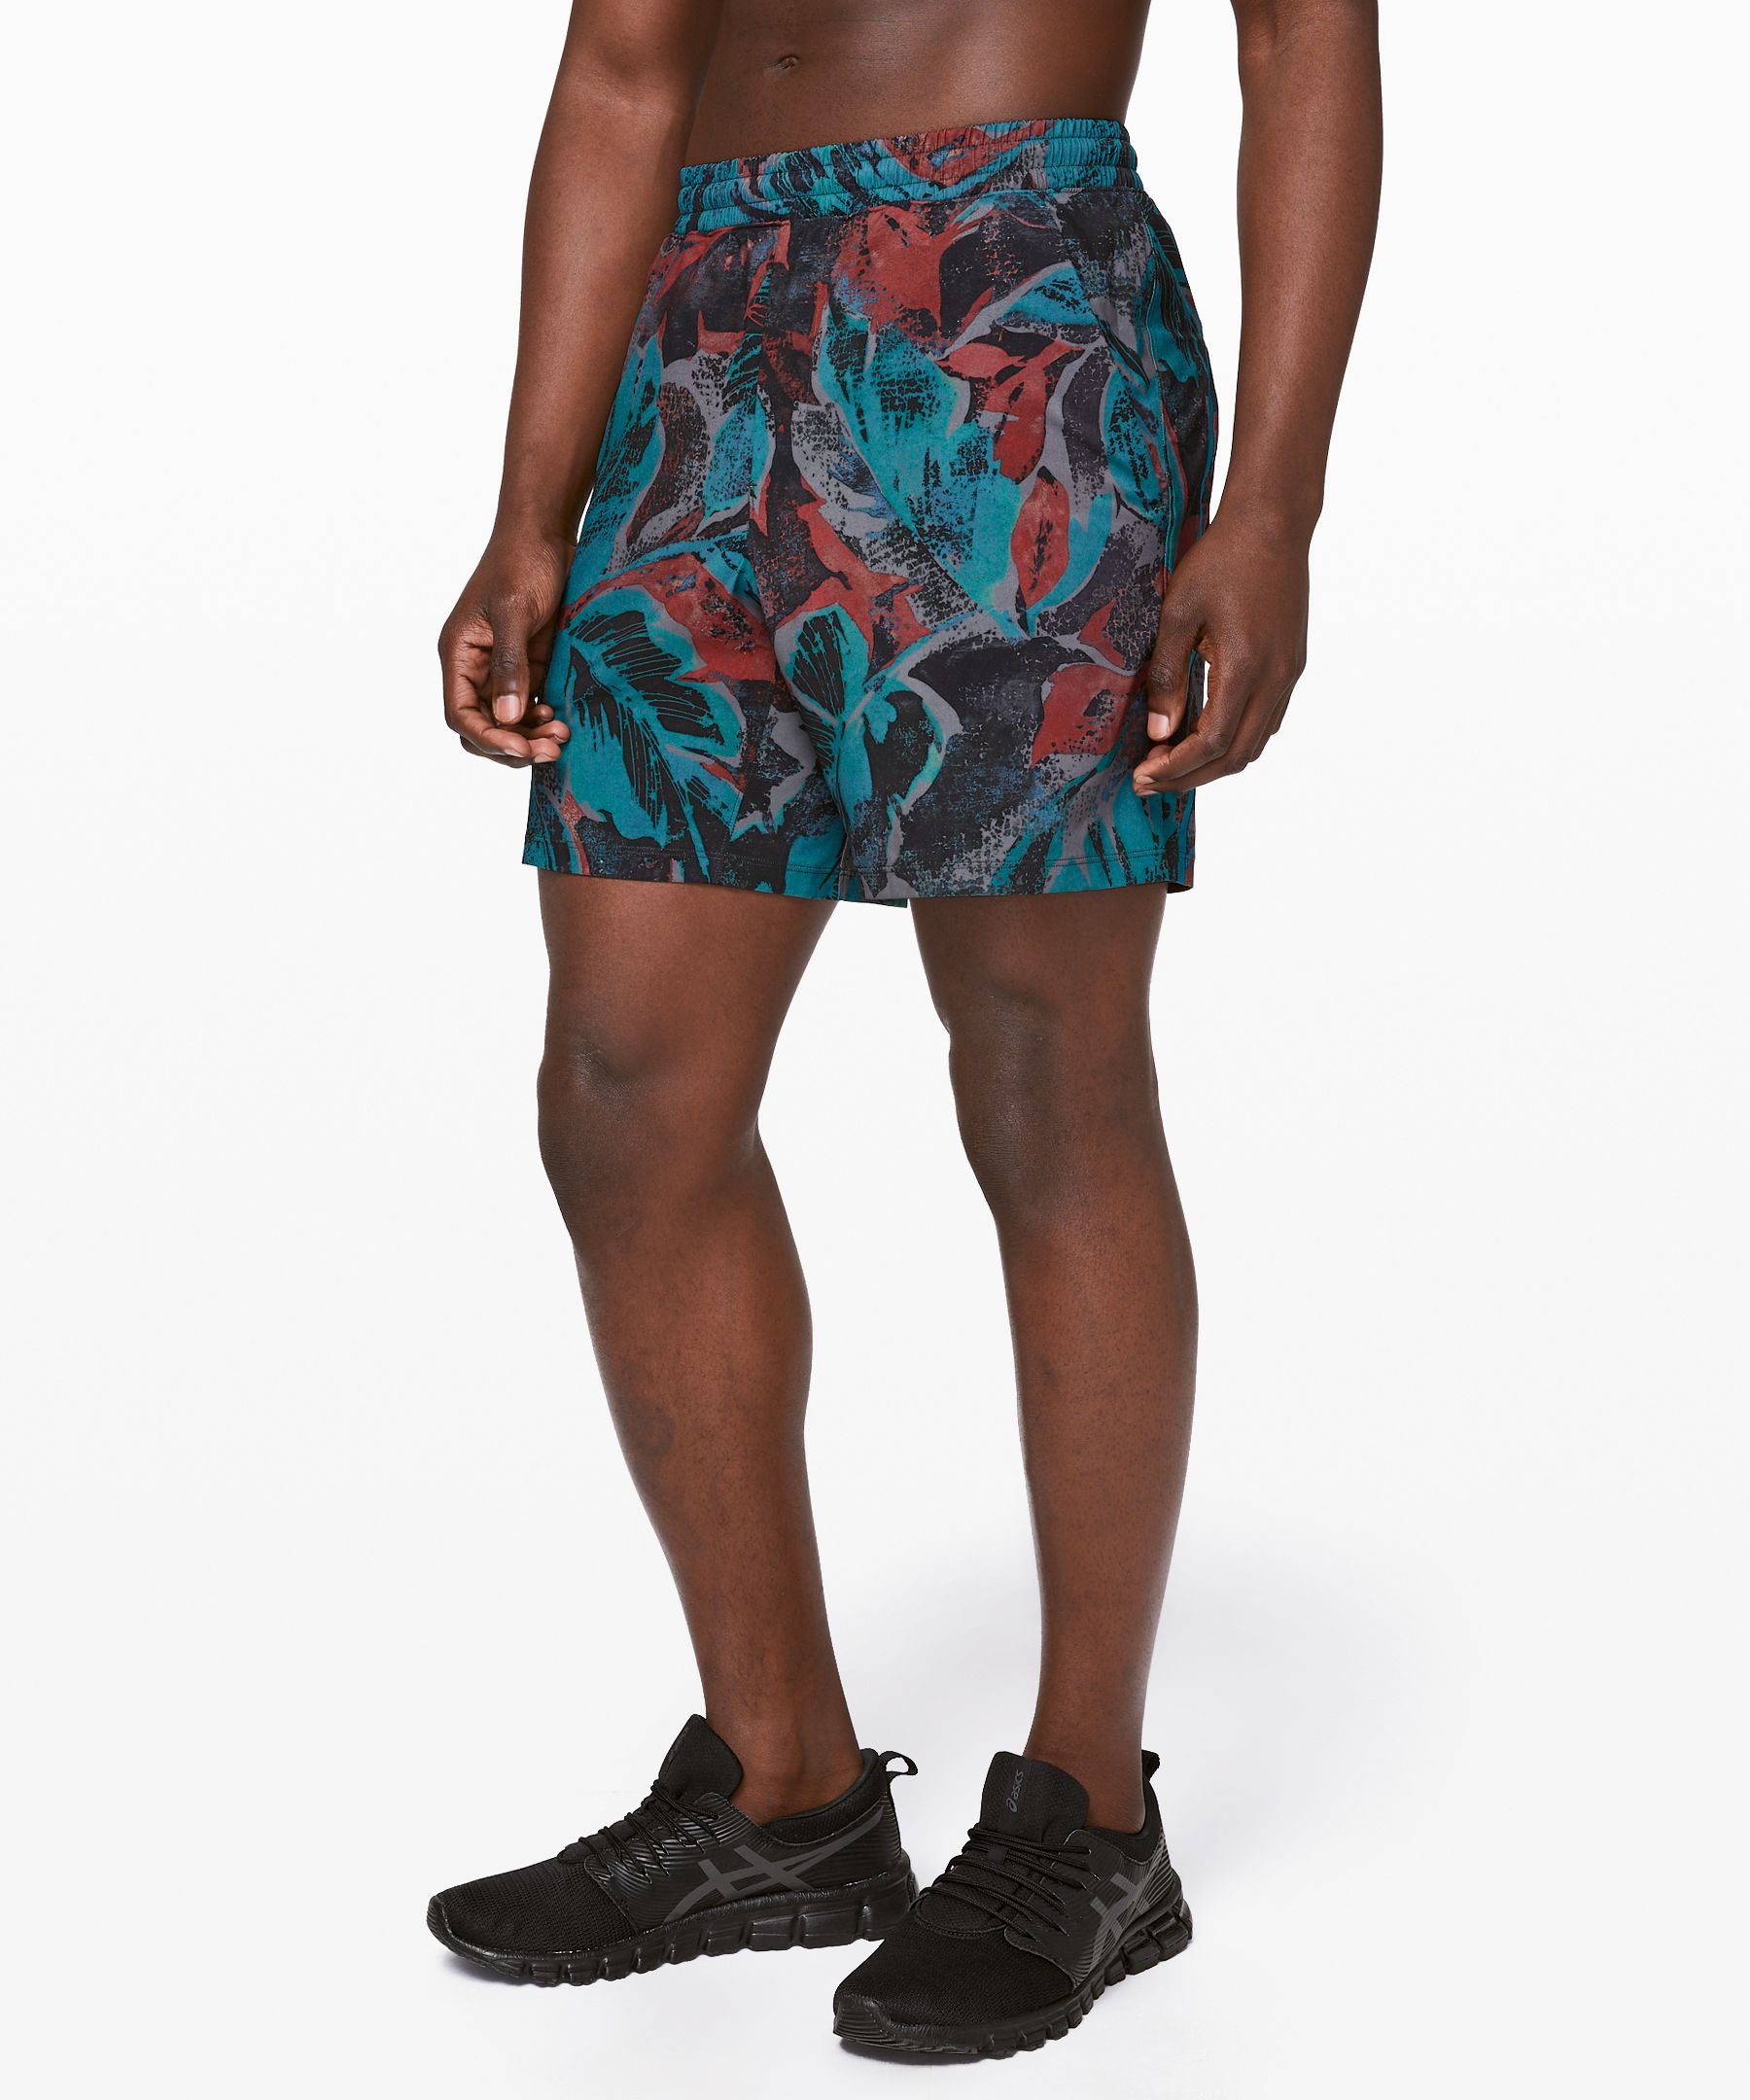 Floral Electric Multi print…has anyone ordered these? I think I'm loving  the print but would like to see some pictures before purchasing! : r/ lululemon